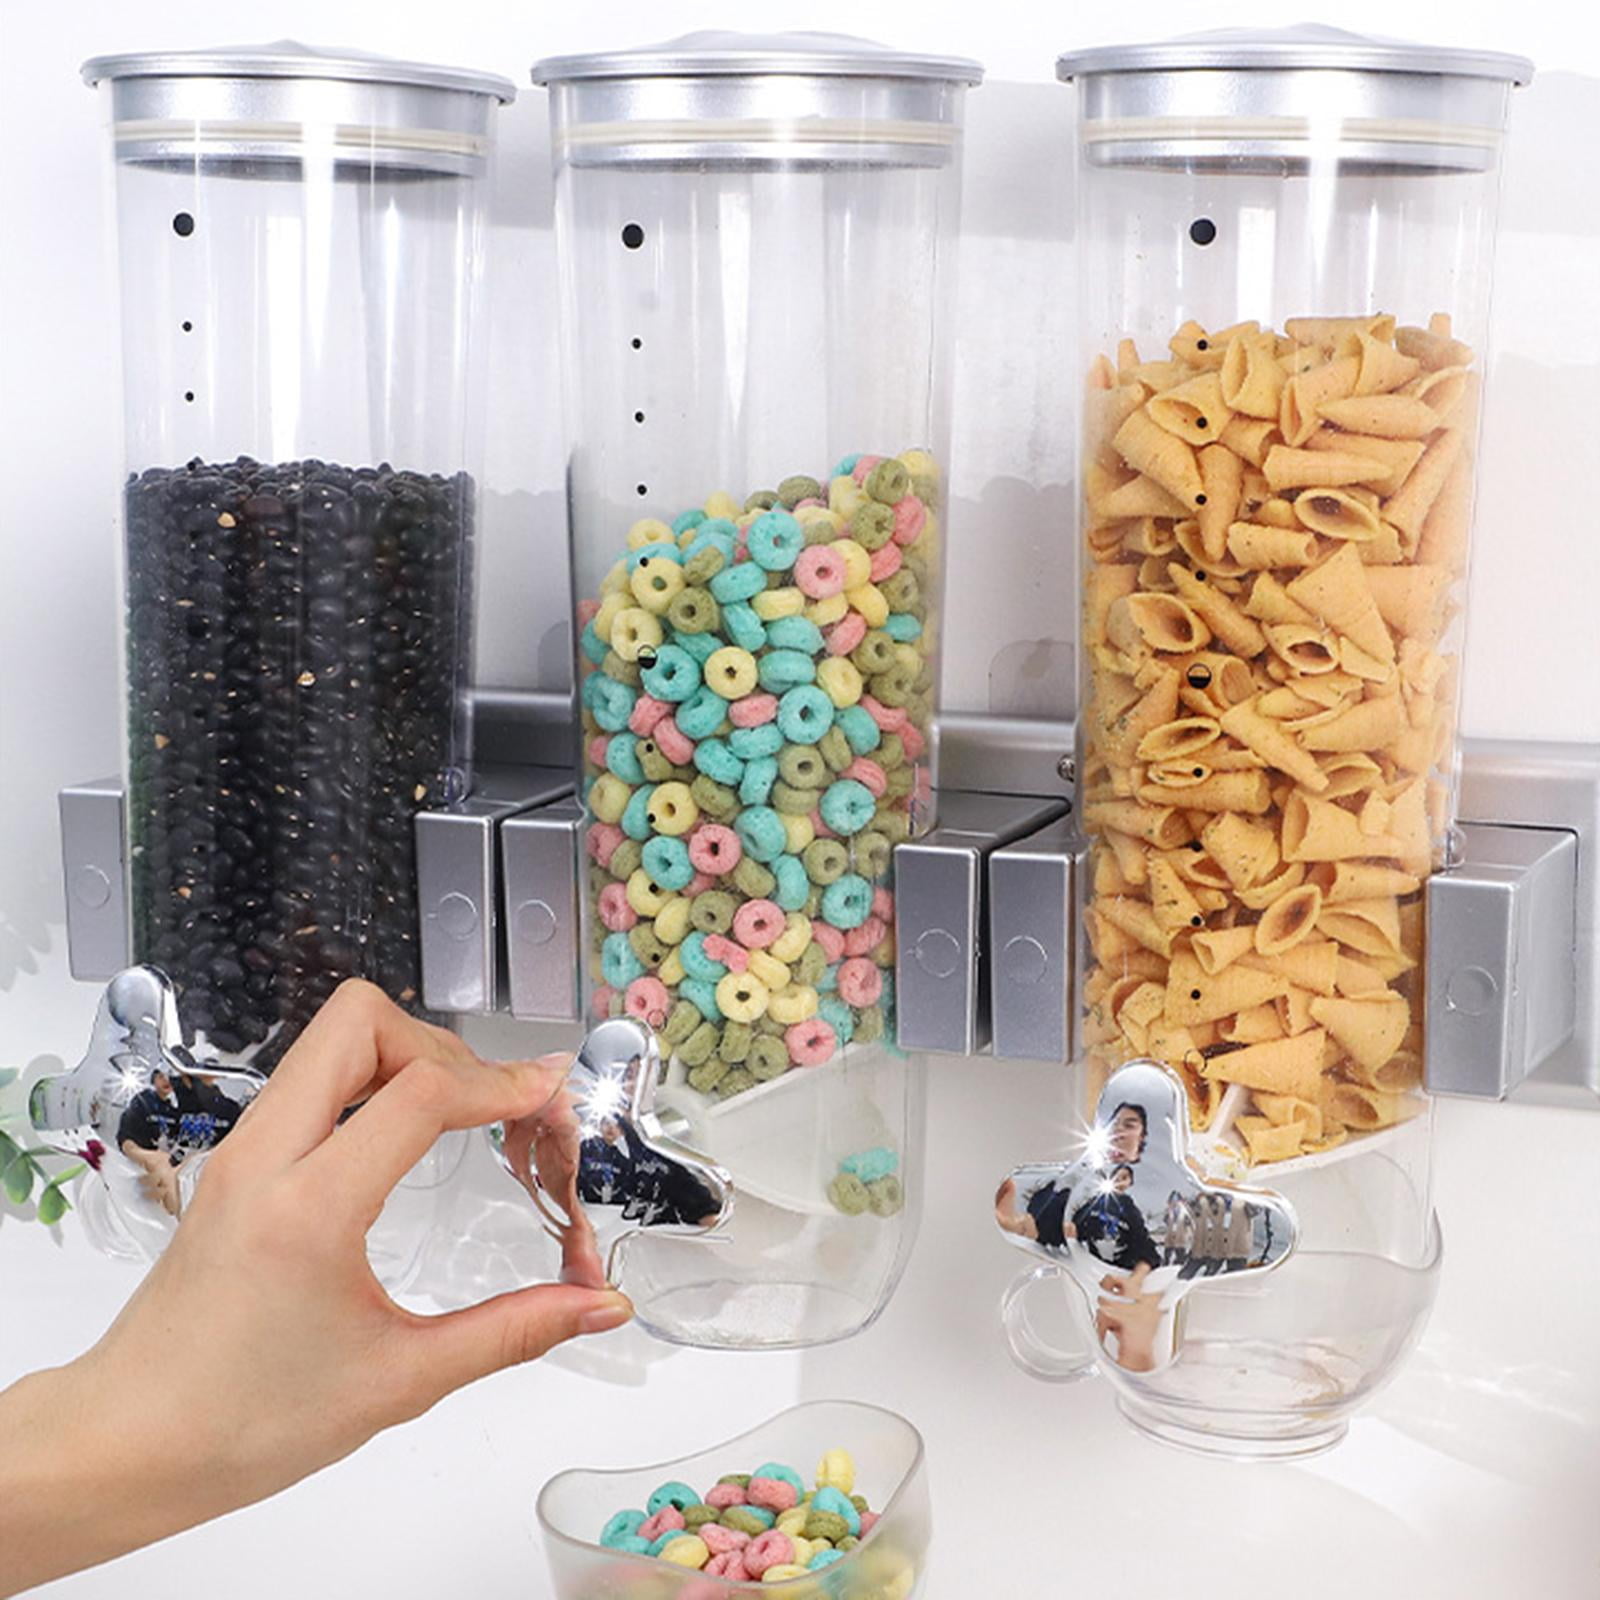 Cereal Dispenser Wall Mounted, Grains Dispenser, Wall Mounted, Dry Food  Dispenser for Store, Kitchen Cereal Container Storage 4.1-5L White